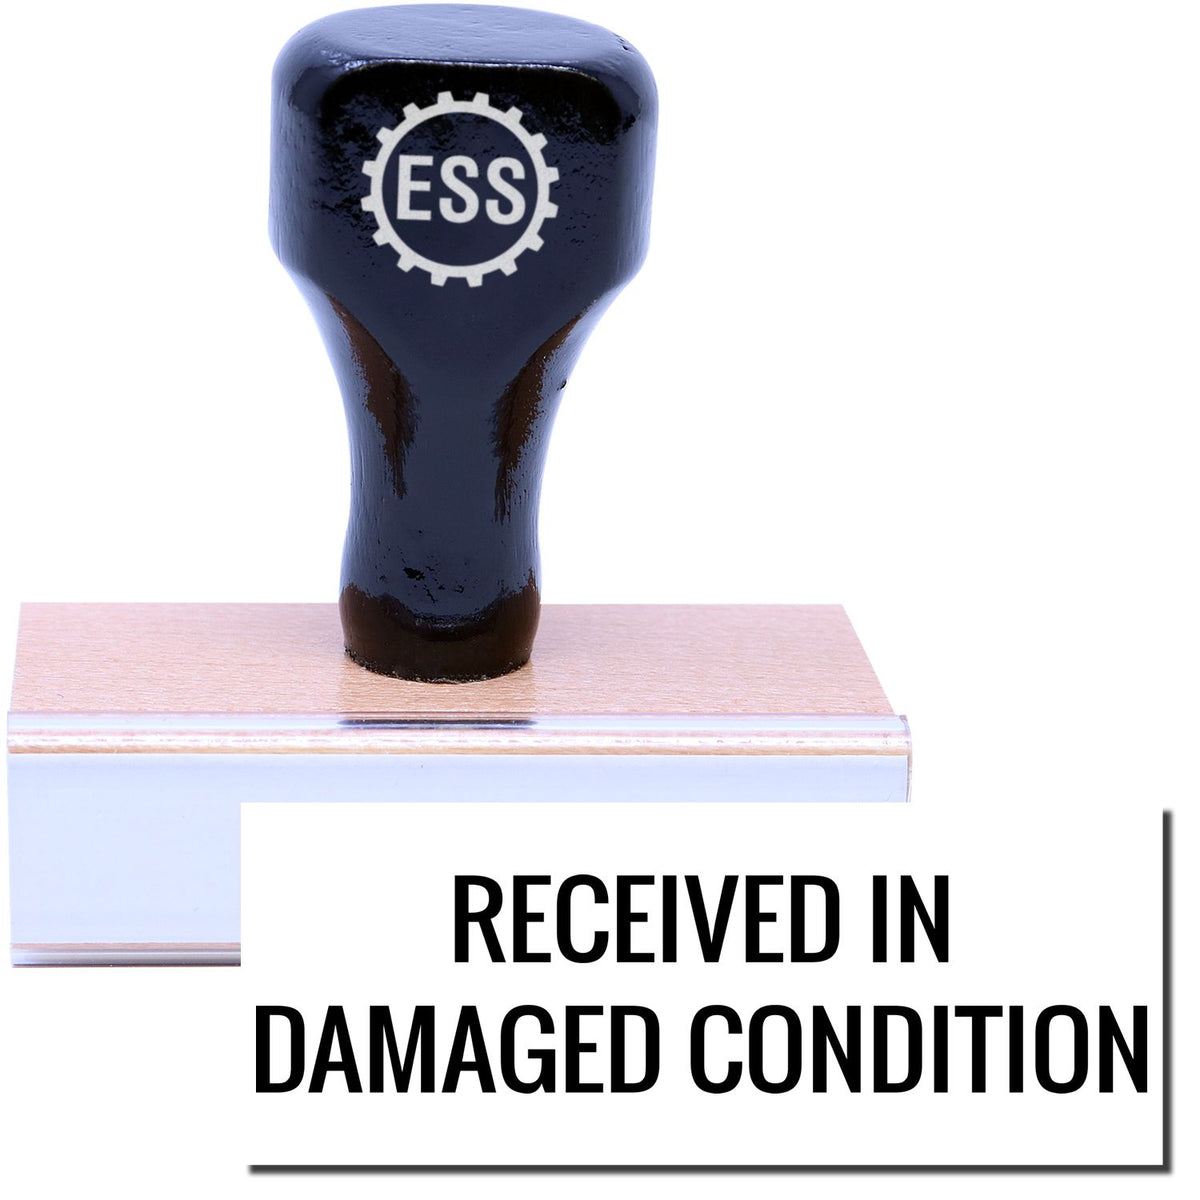 A stock office rubber stamp with a stamped image showing how the text &quot;RECEIVED IN DAMAGED CONDITION&quot; in a large font is displayed after stamping.